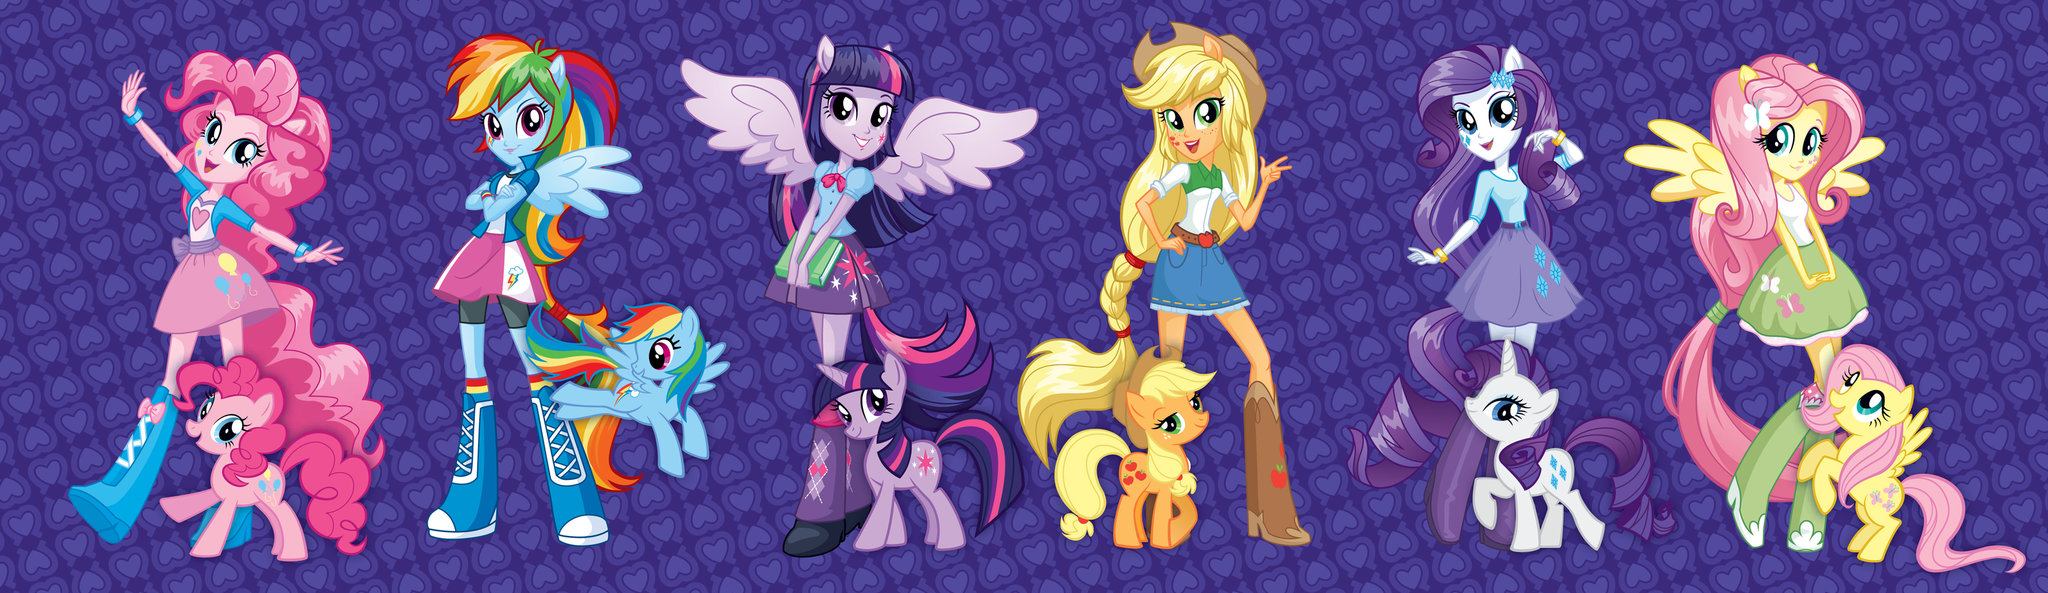 Concept art of the Equestria Girls version of the Mane Six, alongside their regular pony versions.